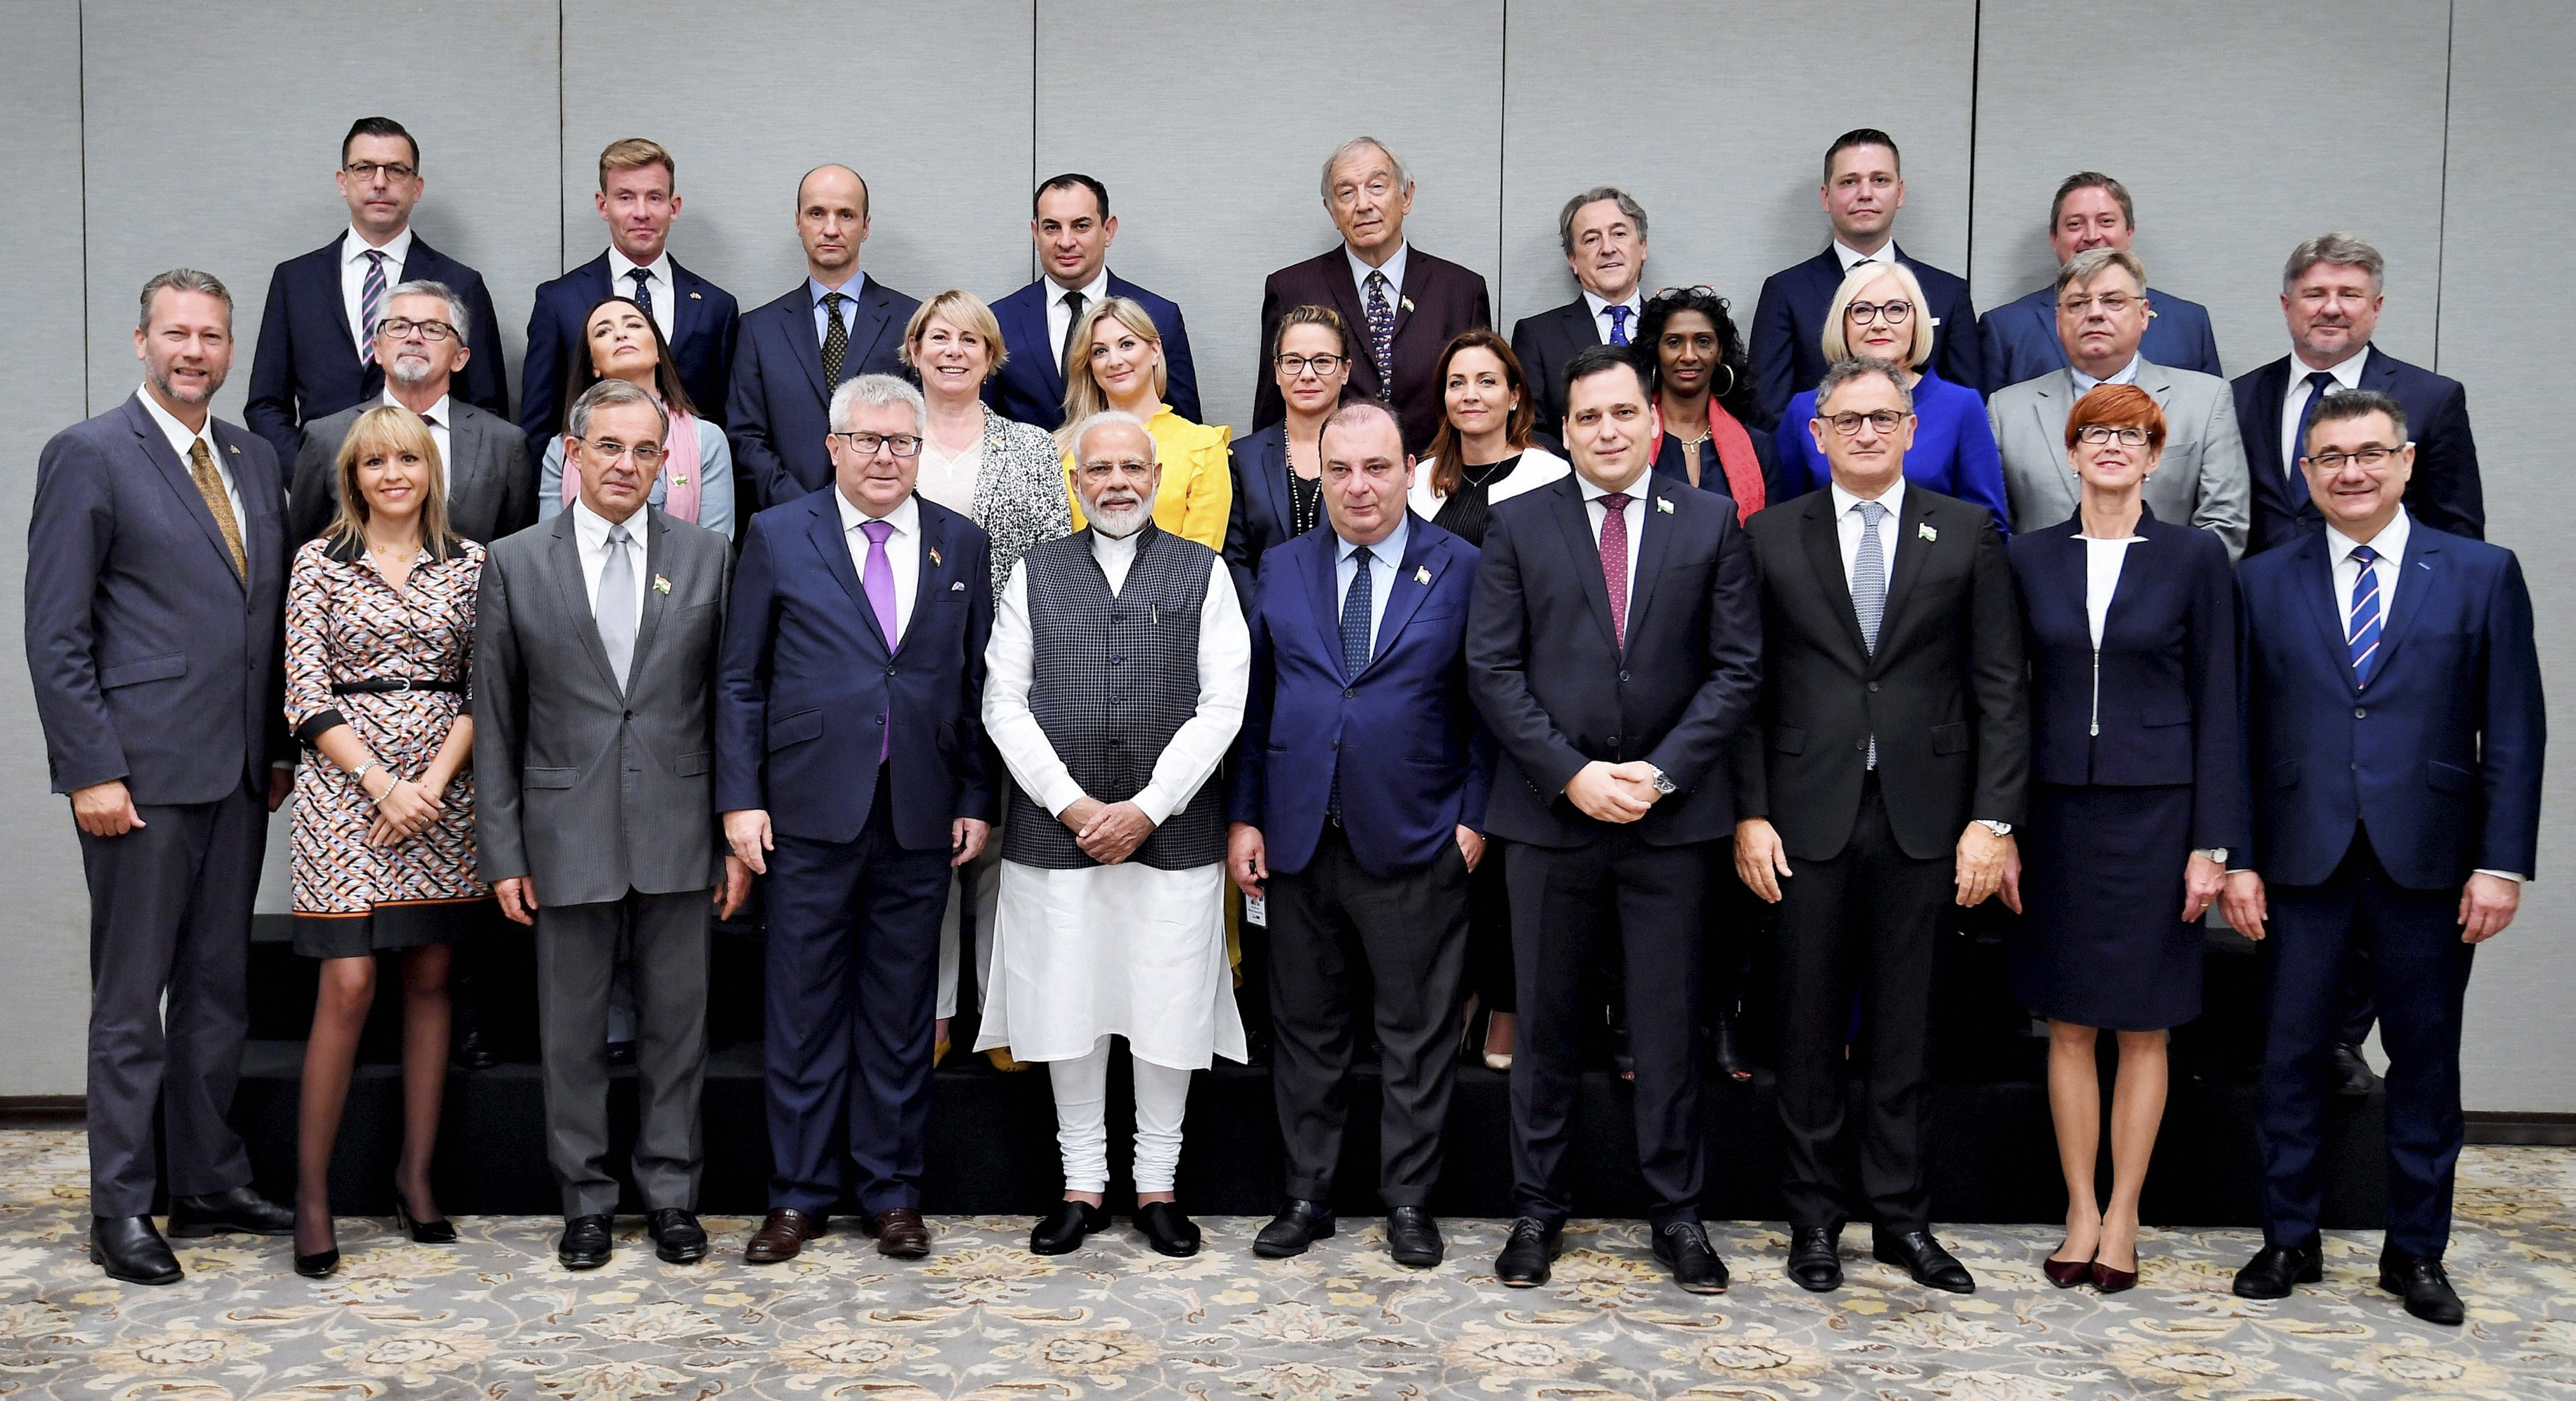 Prime Minister Narendra Modi with members of European Parliament in New Delhi on October 28.